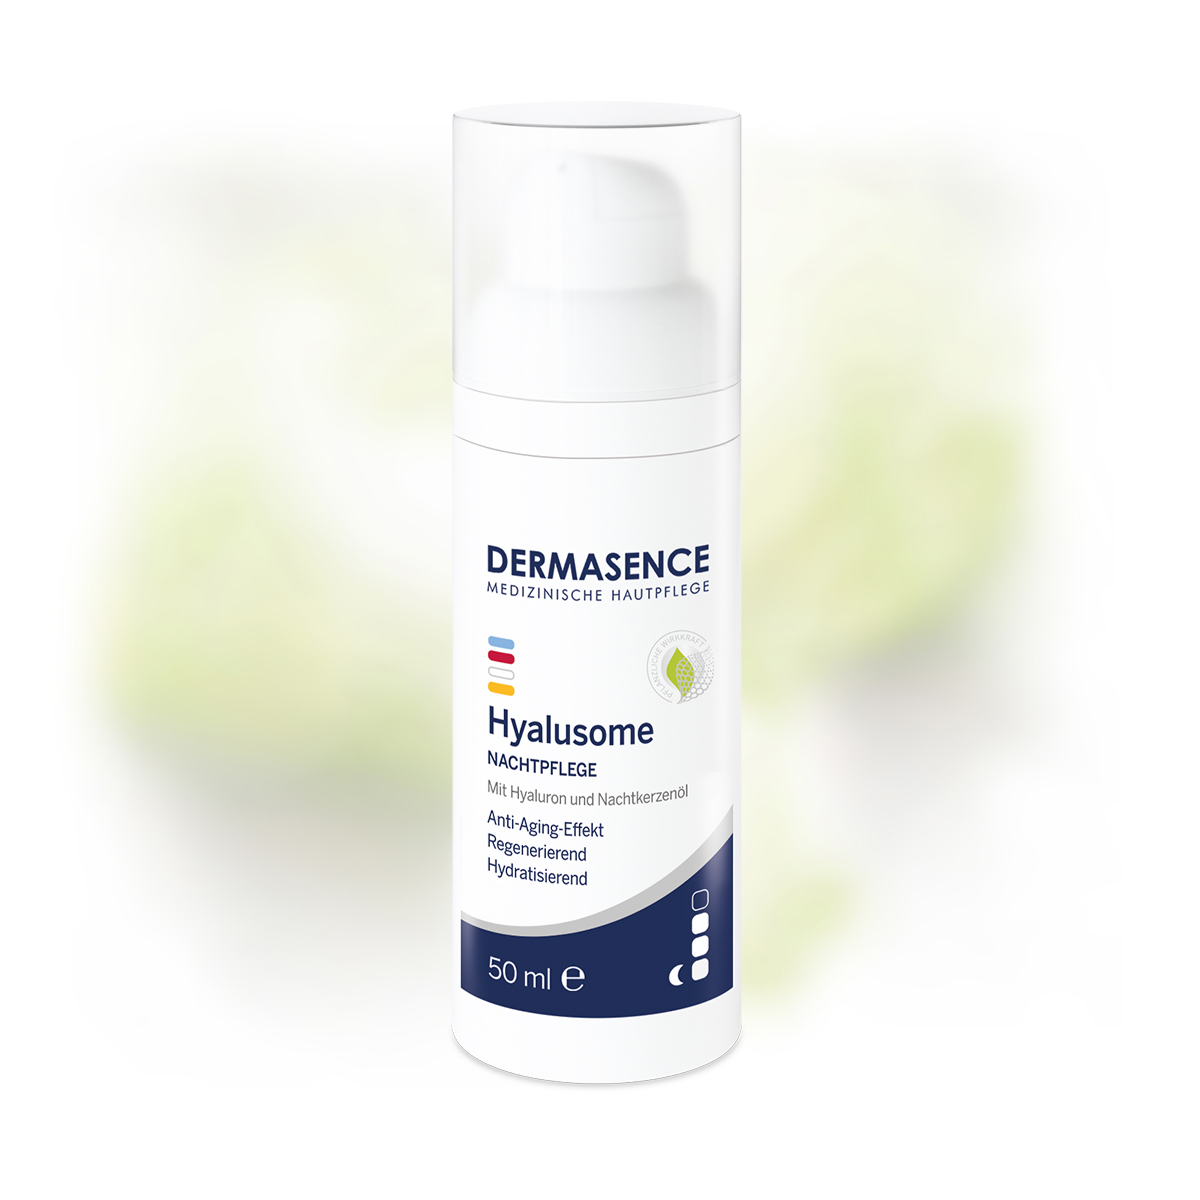 DERMASENCE Hyalusome Night care, 50 ml